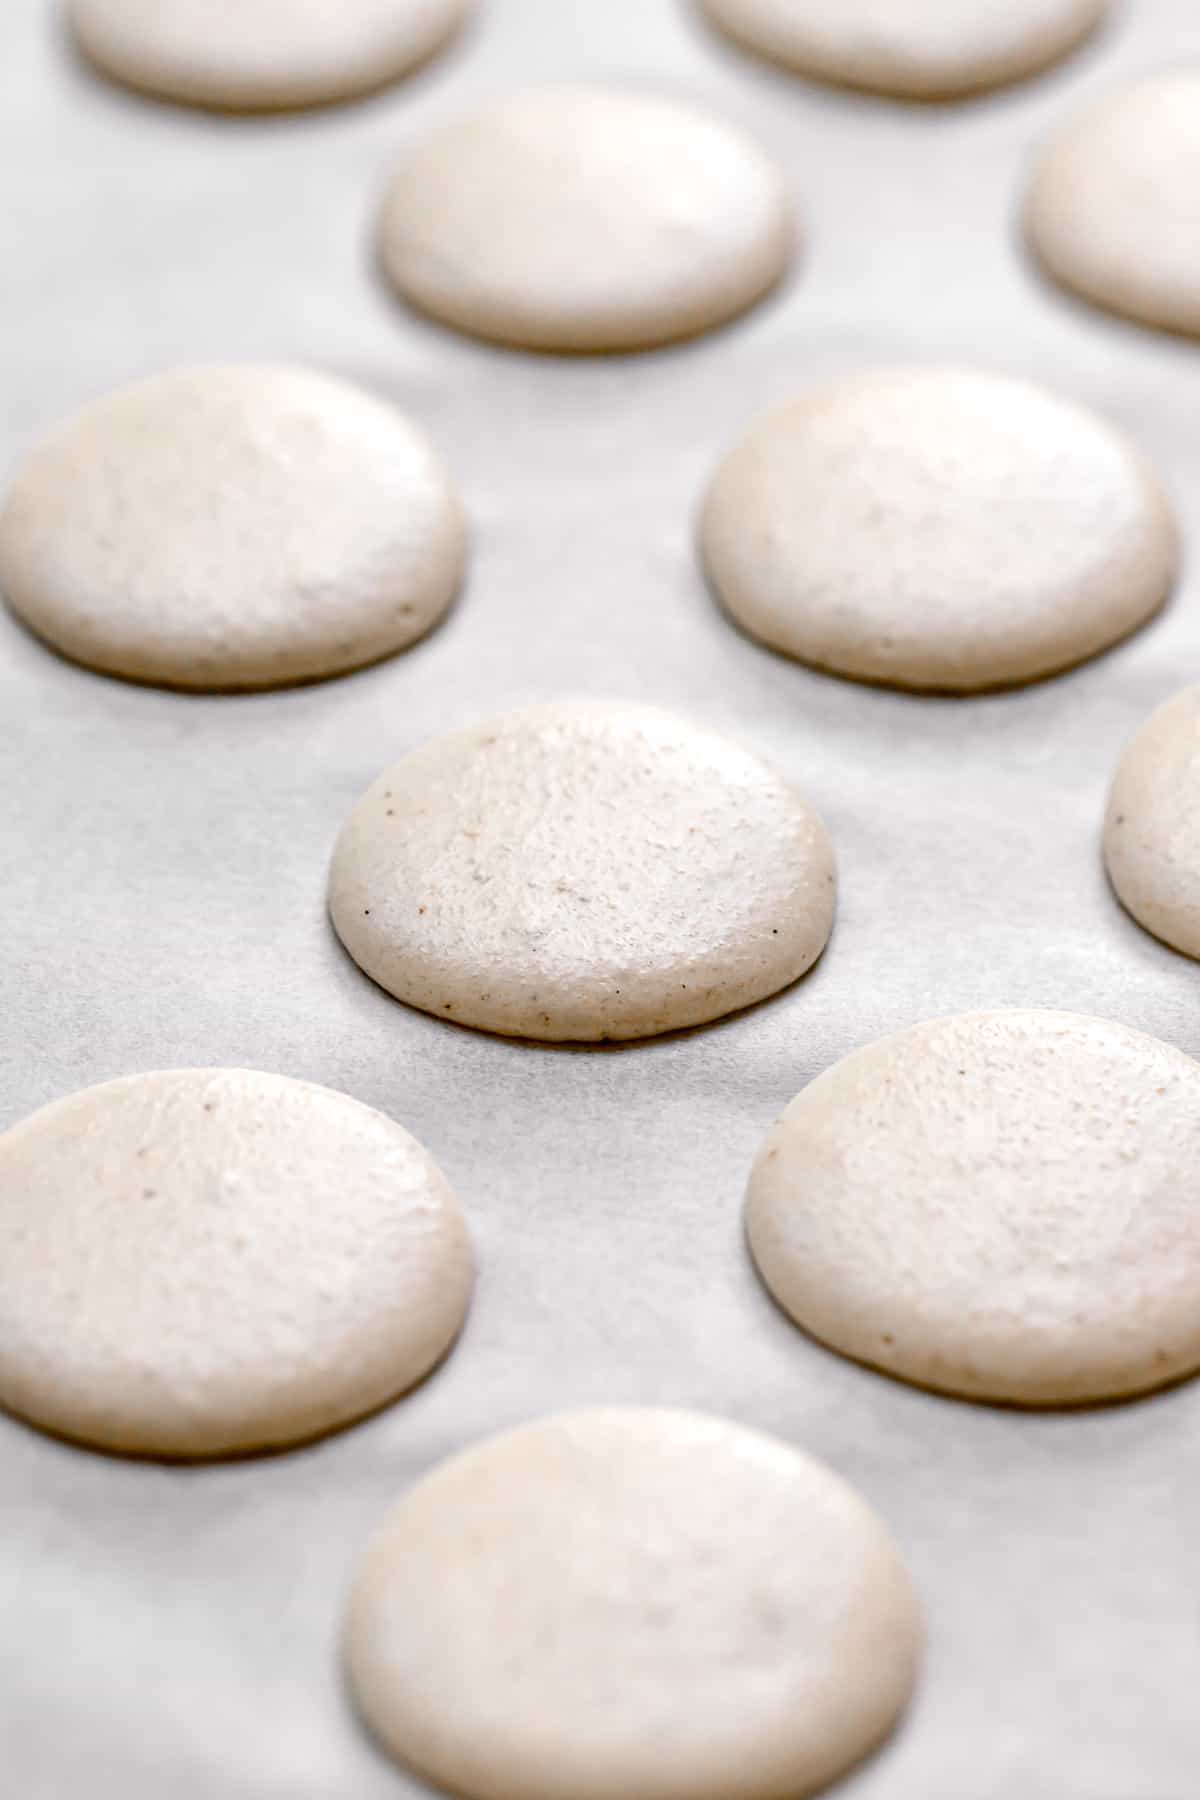 piped macaron batter on parchment lined baking sheet.